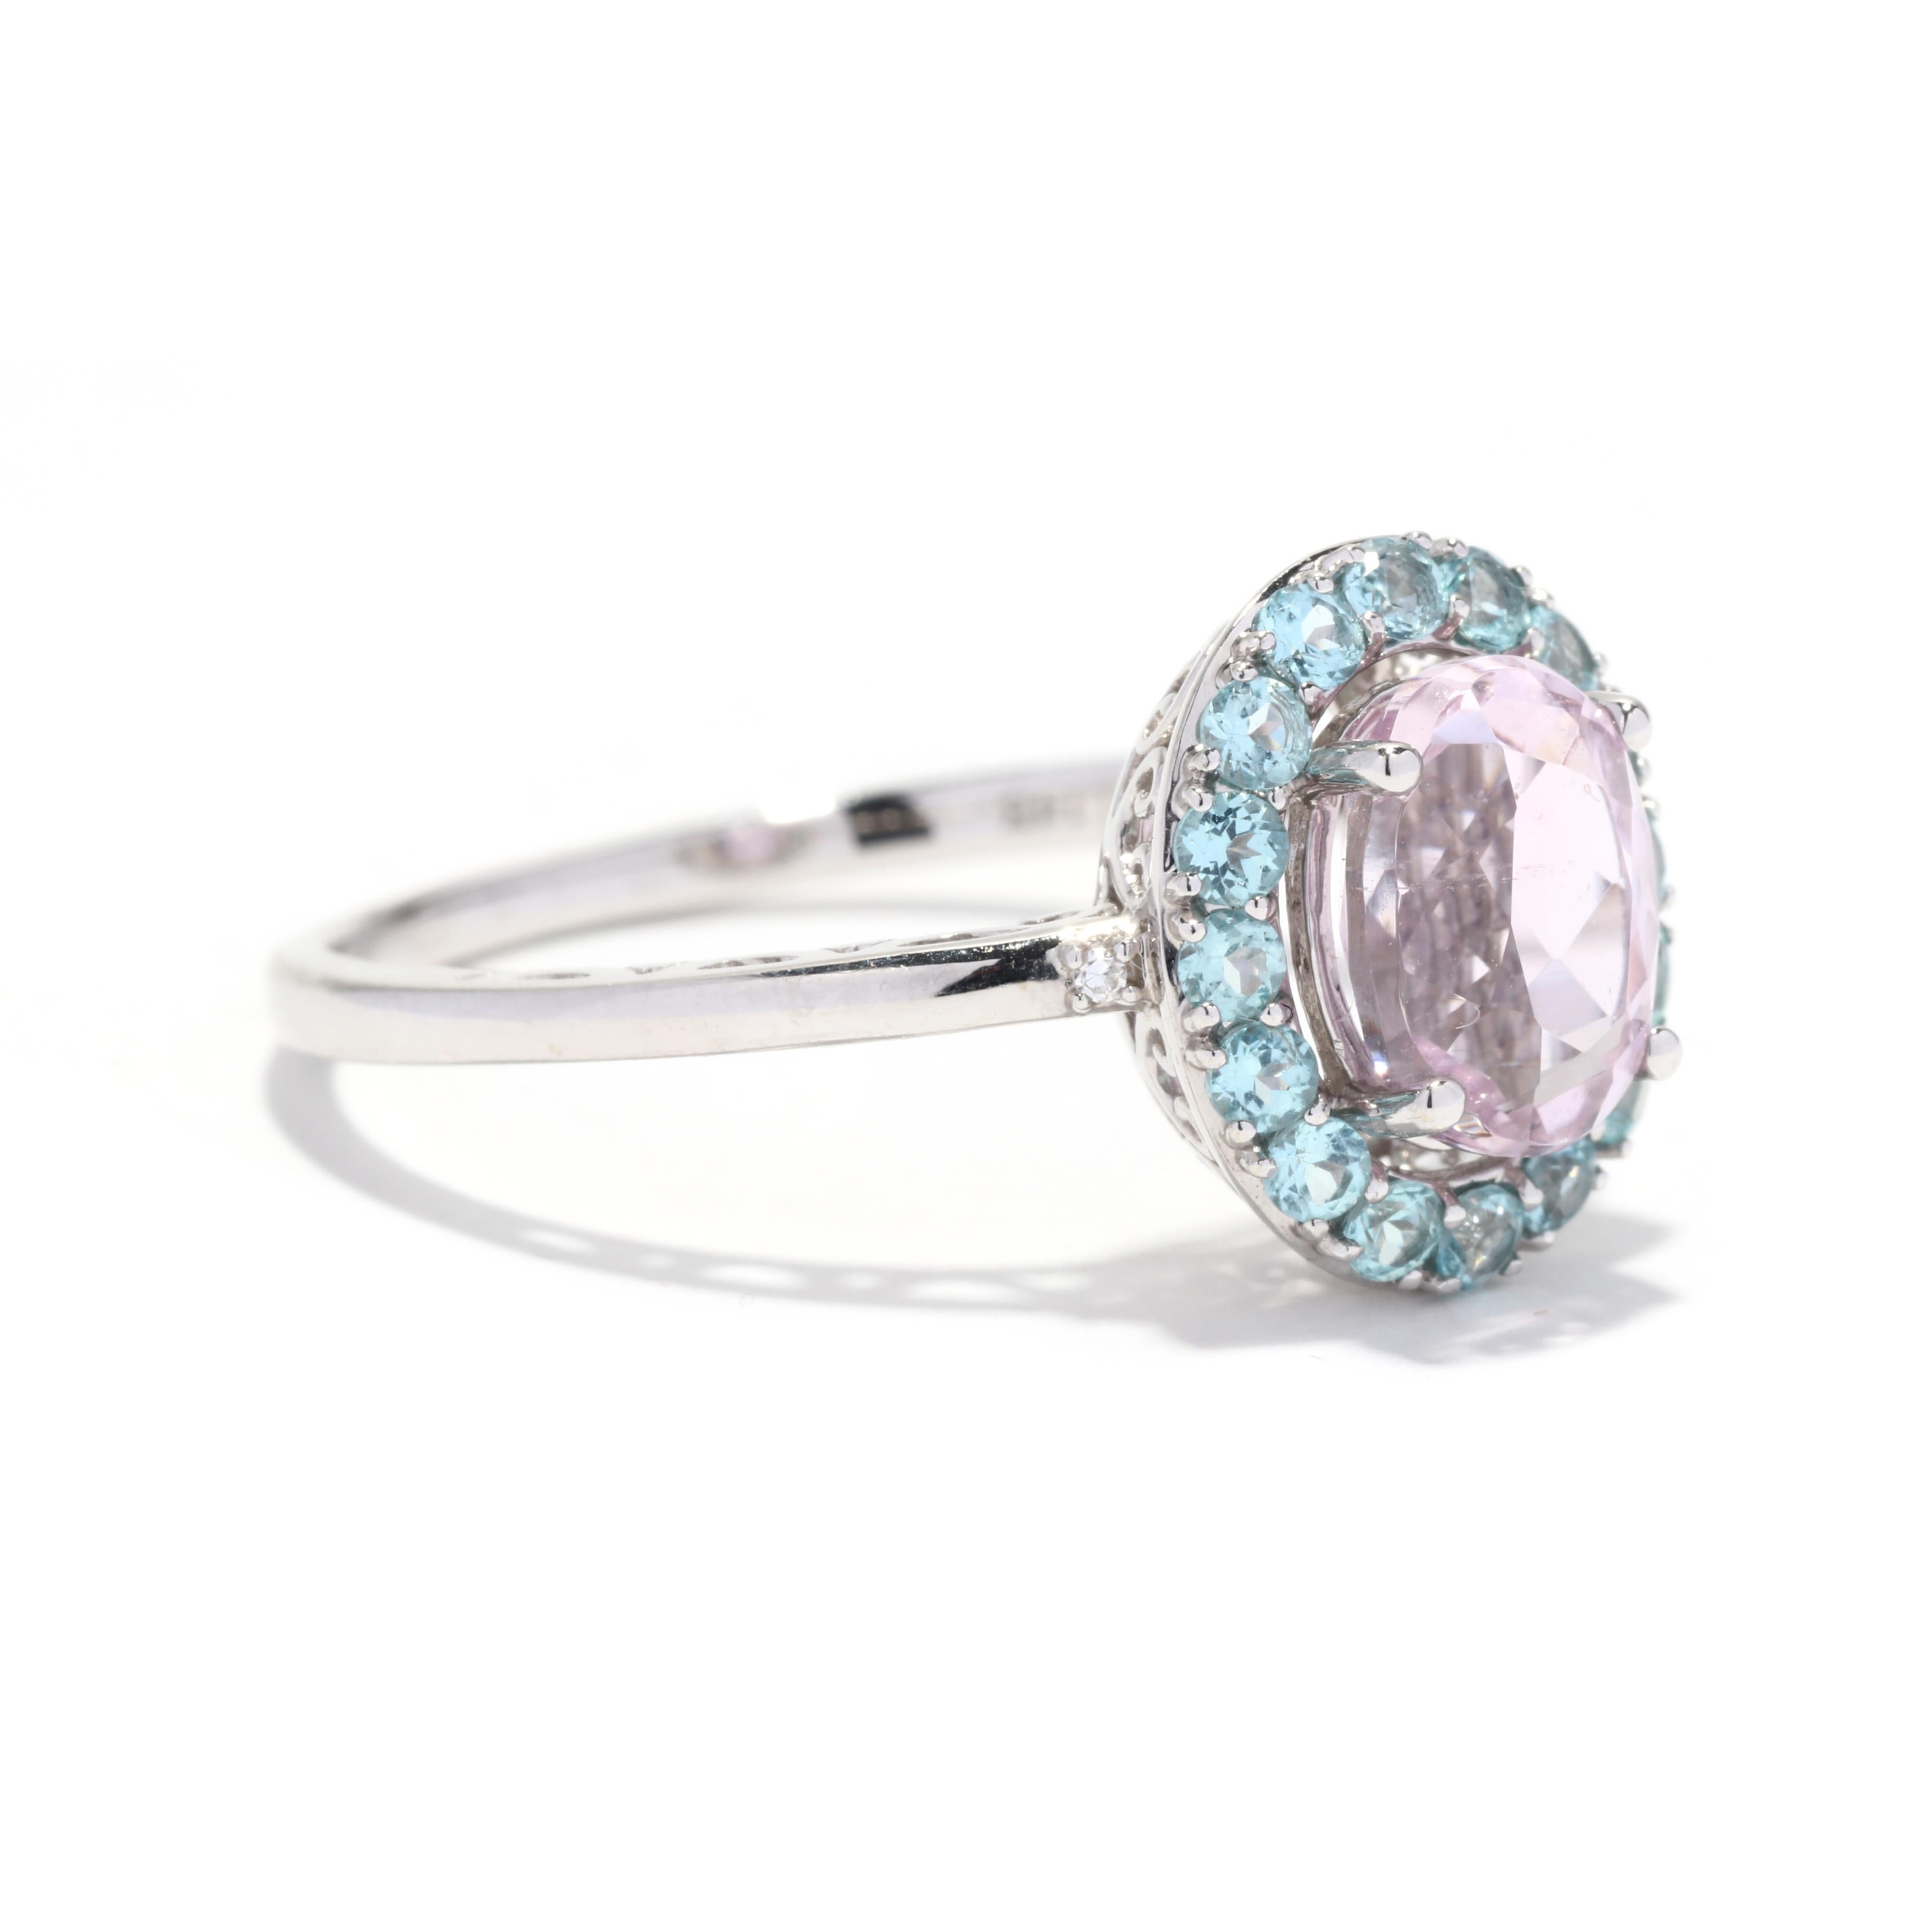 A vintage 14 karat white gold kunzite and aquamarine ring. This simple ring features a prong set, oval cut kunzite center stone weighing approximately 2.03 carats surrounded by a halo of round cut aquamarines weighing approximately .64 total carats